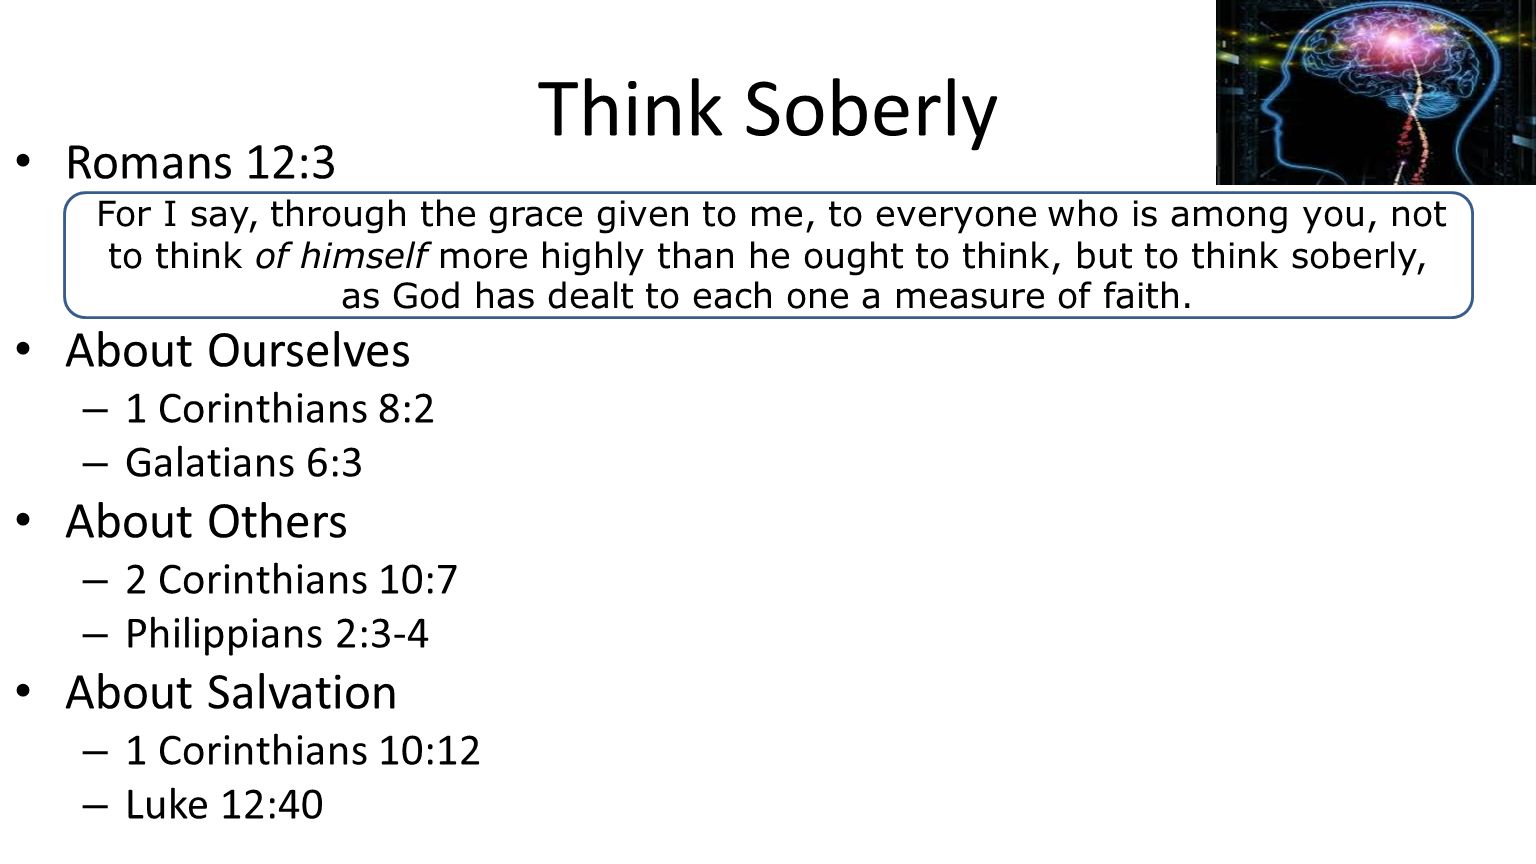 Think Soberly Romans 12:3 About Ourselves – 1 Corinthians 8:2 – Galatians 6:3 About Others – 2 Corinthians 10:7 – Philippians 2:3-4 About Salvation – 1 Corinthians 10:12 – Luke 12:40 For I say, through the grace given to me, to everyone who is among you, not to think of himself more highly than he ought to think, but to think soberly, as God has dealt to each one a measure of faith.